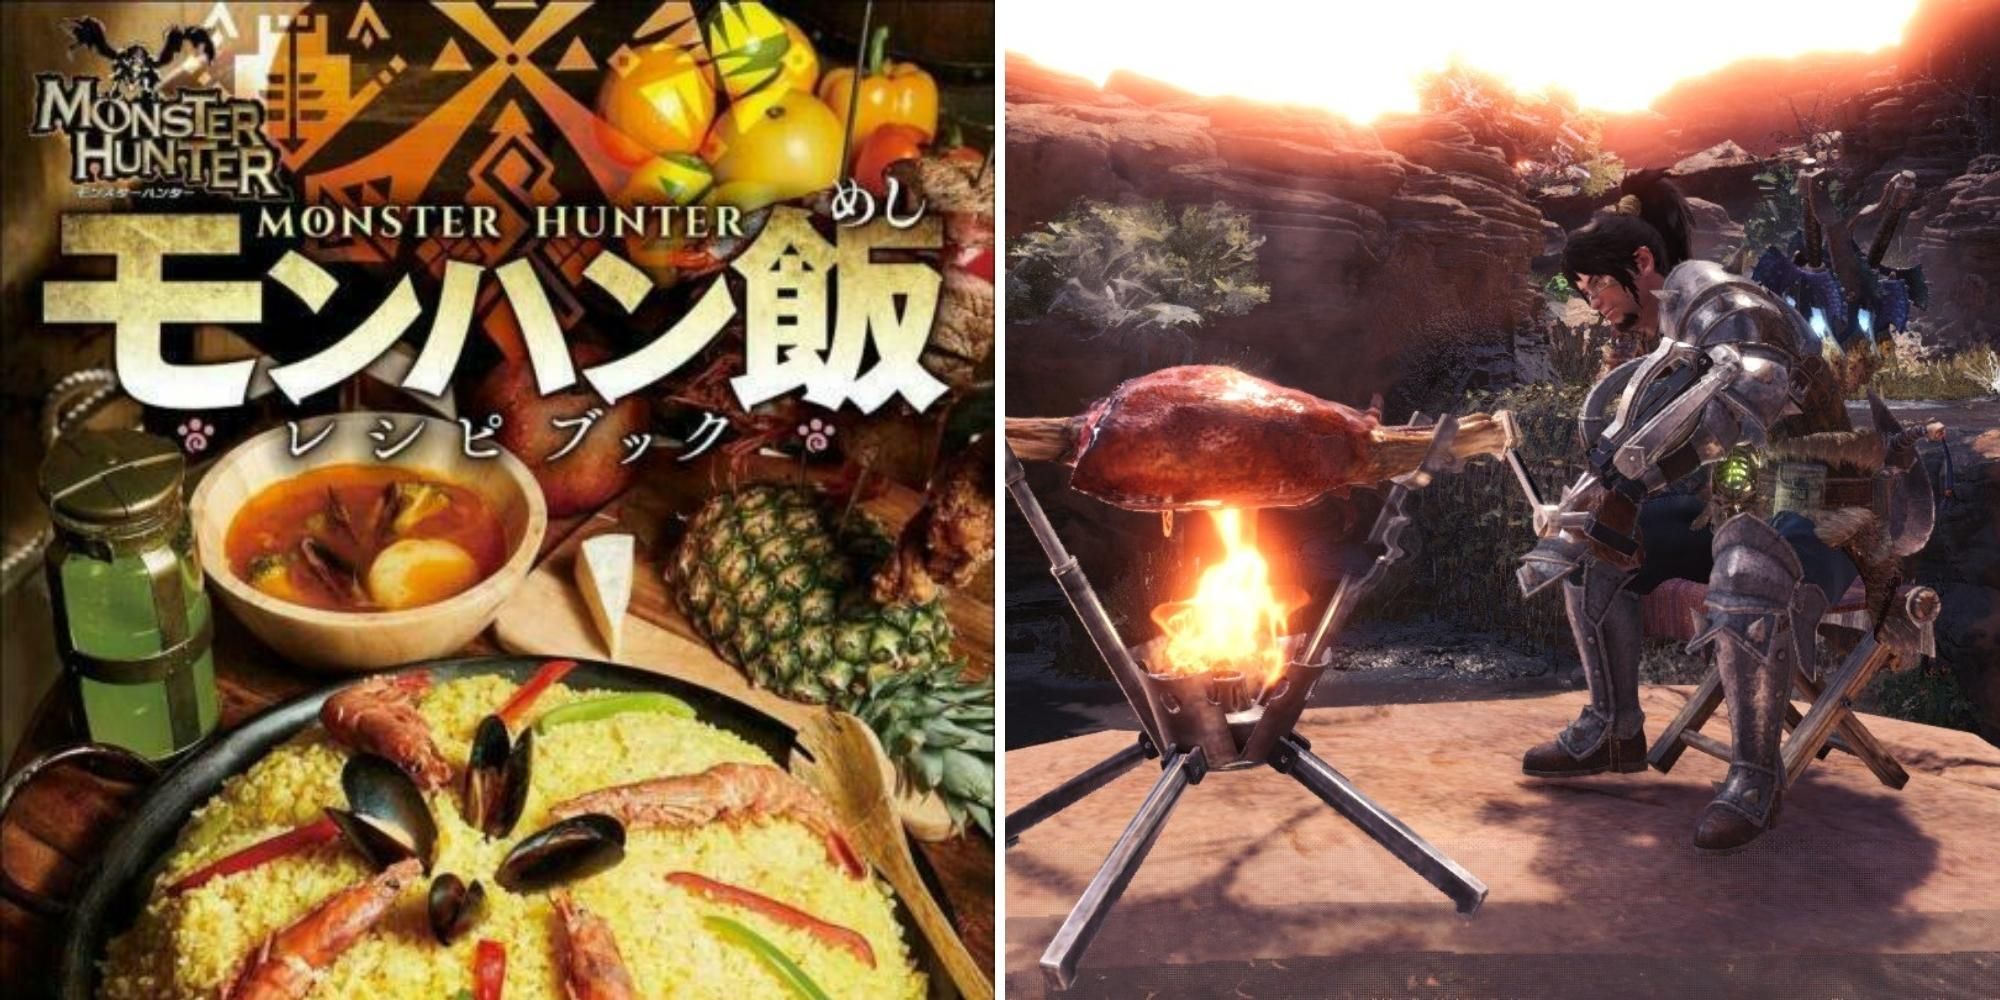 Monster Hunter Meal Recipe Book and character cooking in Monster Hunter game